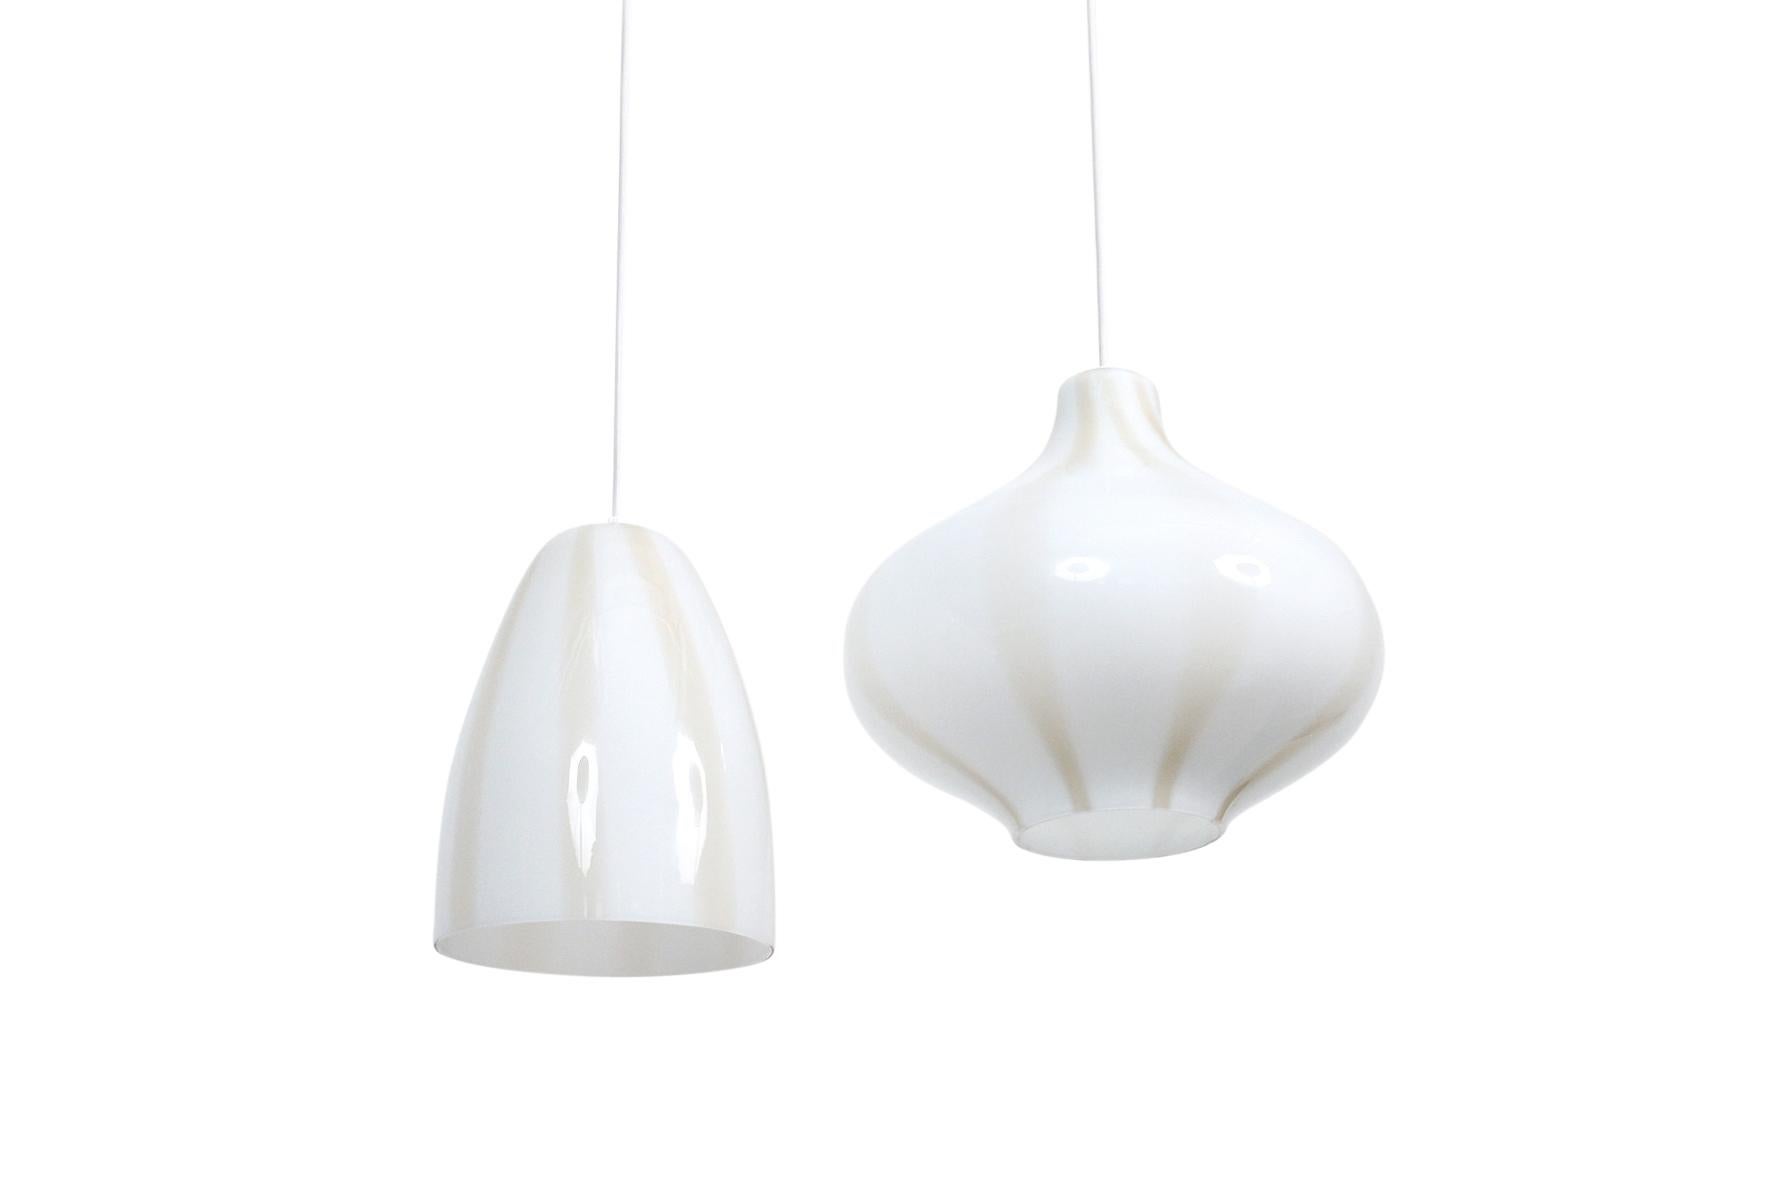 Collection of three pendants by Paolo Venini for the famed Italian glass company. These pendants are executed in a white case glass with subtle bronze striping. Hung along a straight line or in a circular configuration they would create a large